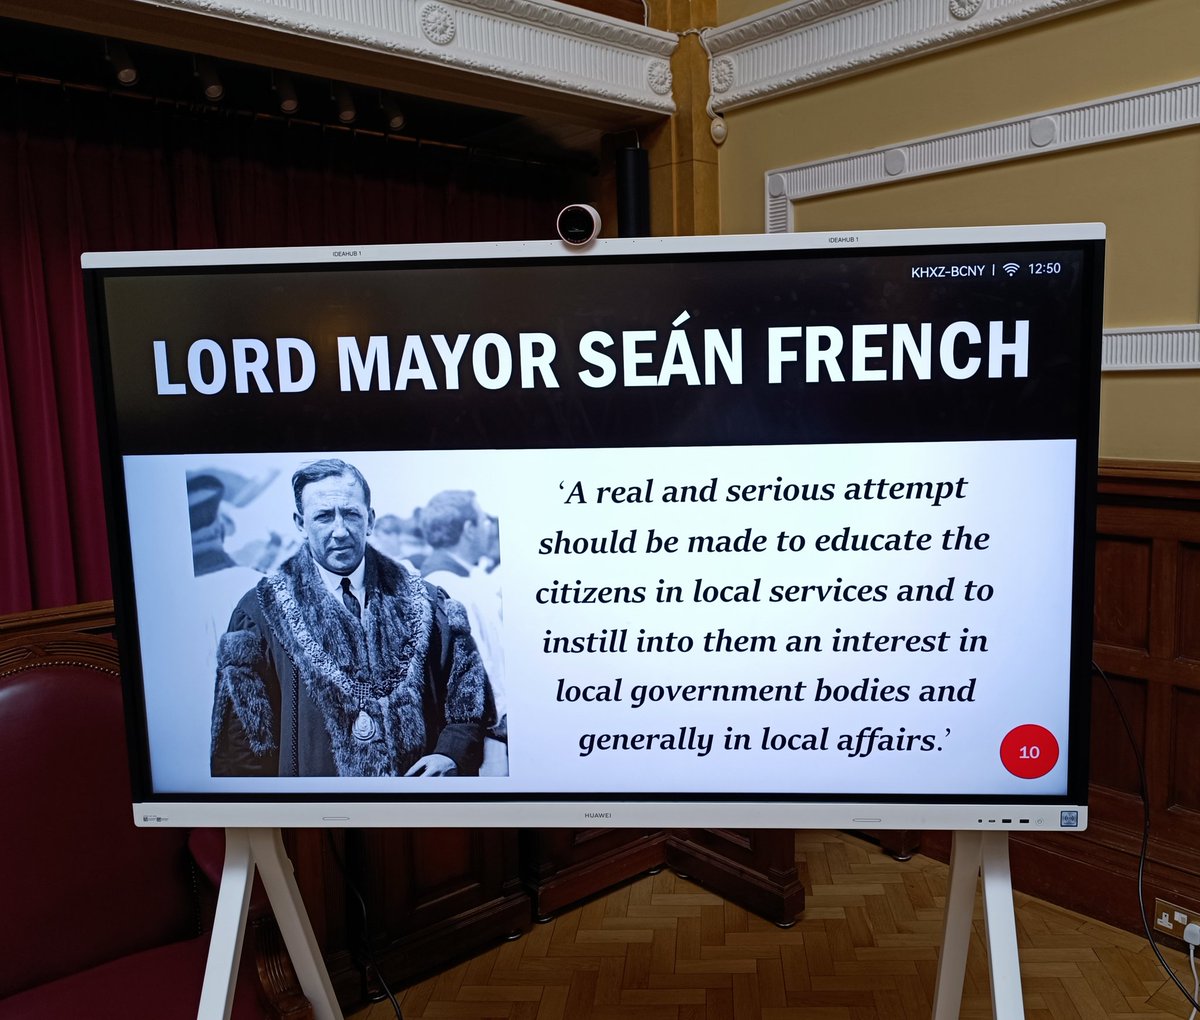 All set in the historic Council Chamber of Cork City Hall. It can be argued that the words of Lord Mayor Seán French from a century ago still ring true. #LunchLearn #LocalGov @UCC @CACSSS1 @CLRGUCC @AILGIRE @DeptHousingIRL @kodonnellLK @corkcitycouncil @LocalGovIre